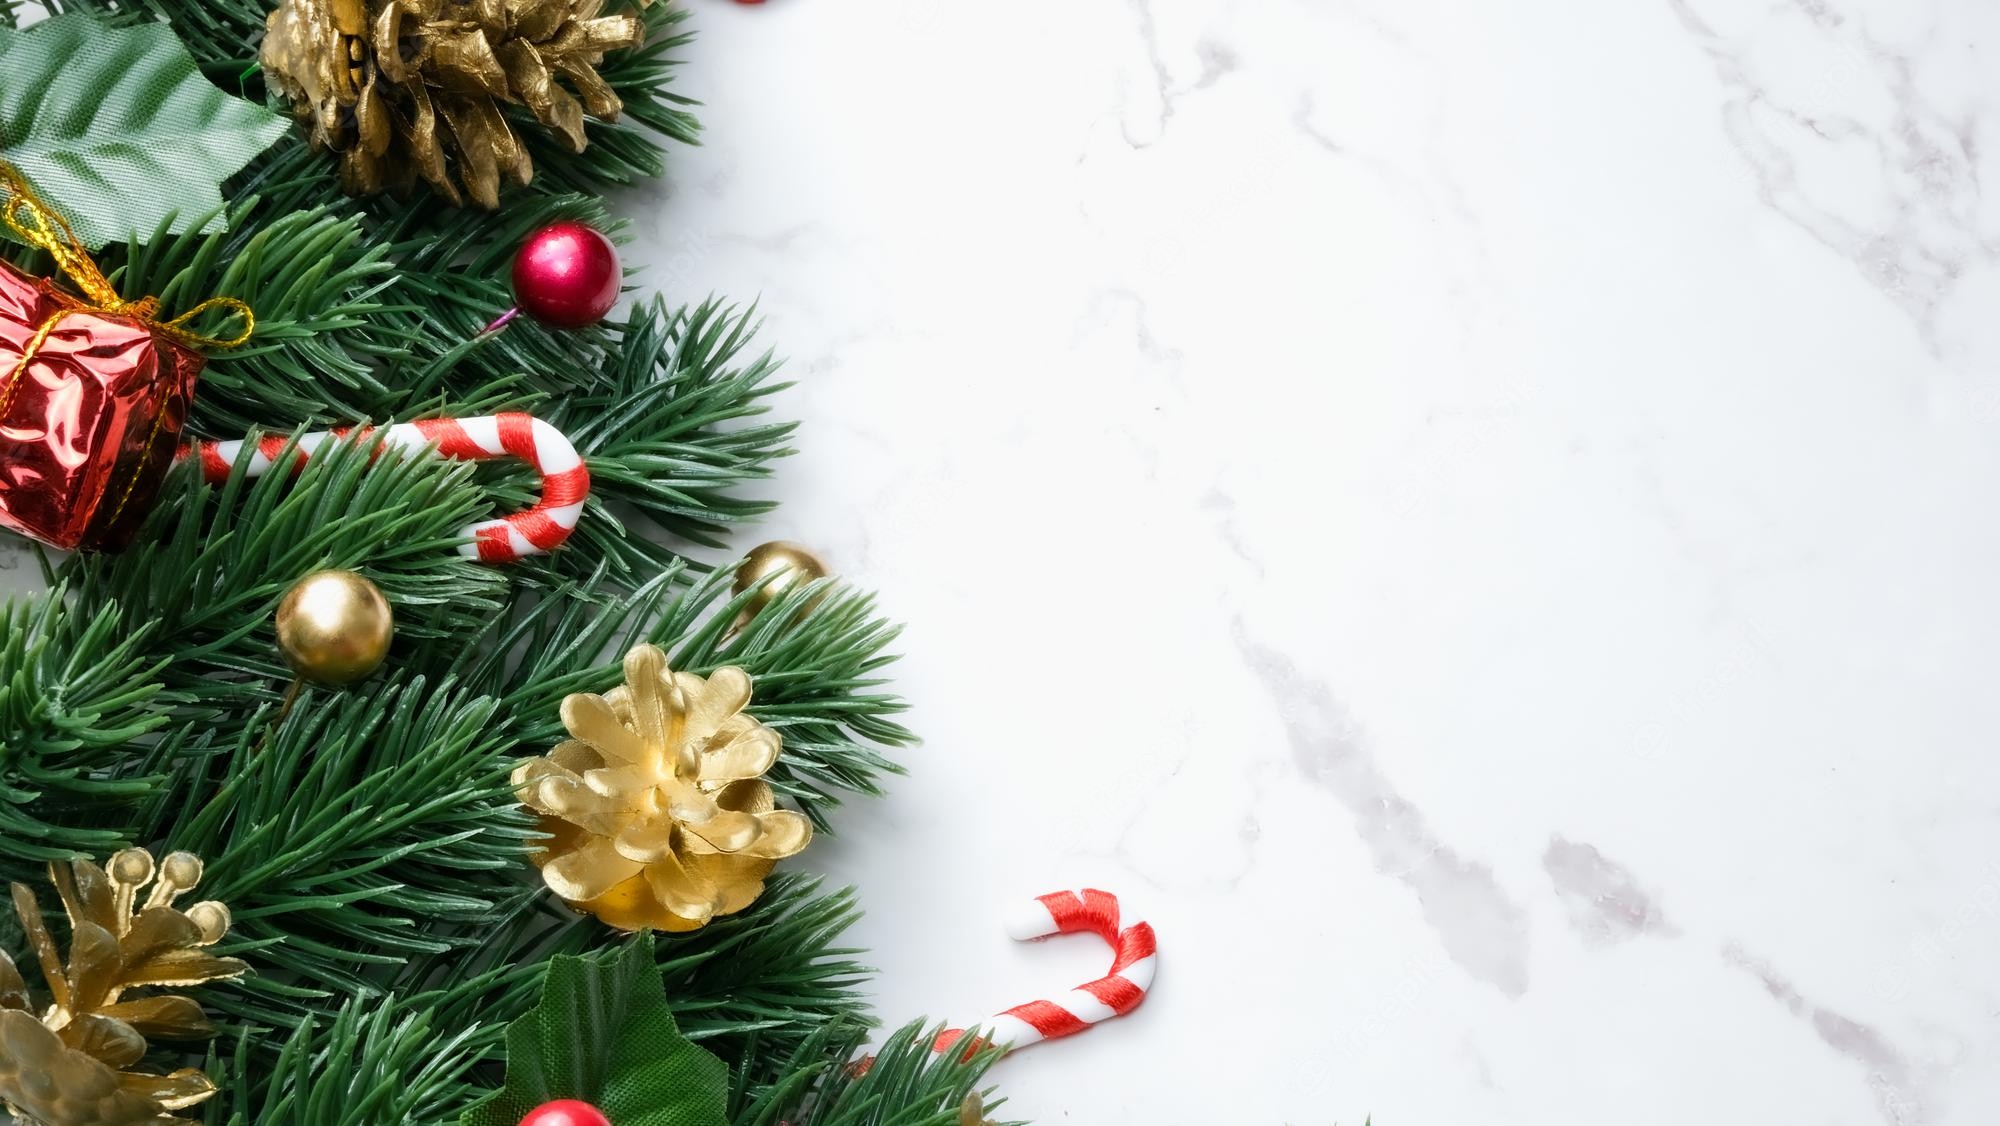 Premium Photo. Green pine tree leaves, red christmas decorations and candy canes on white marble background, christmas decorations in bright red color. simple and creative christmas concept